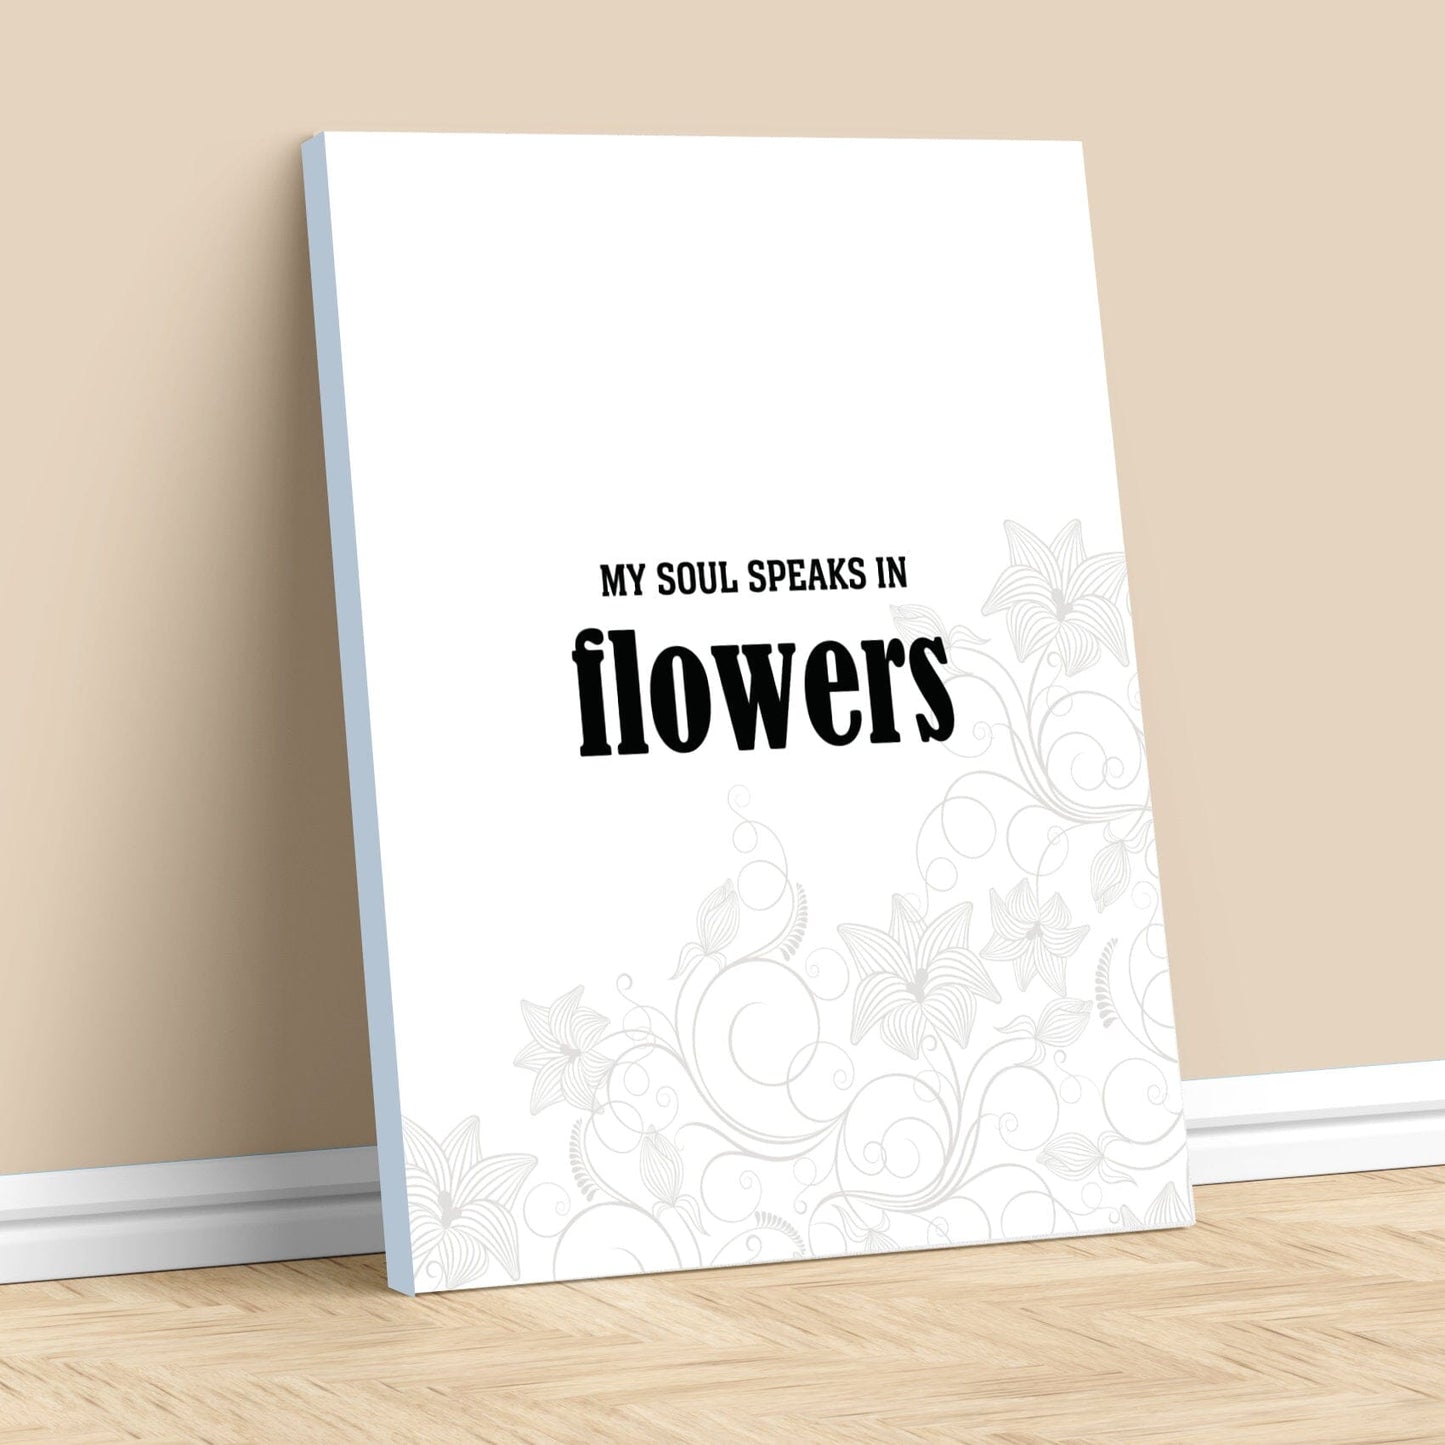 My Soul Speaks in Flowers - Wise and Witty Quote Wall Print Wise and Wiseass Quotes Song Lyrics Art 11x14 Canvas Wrap 